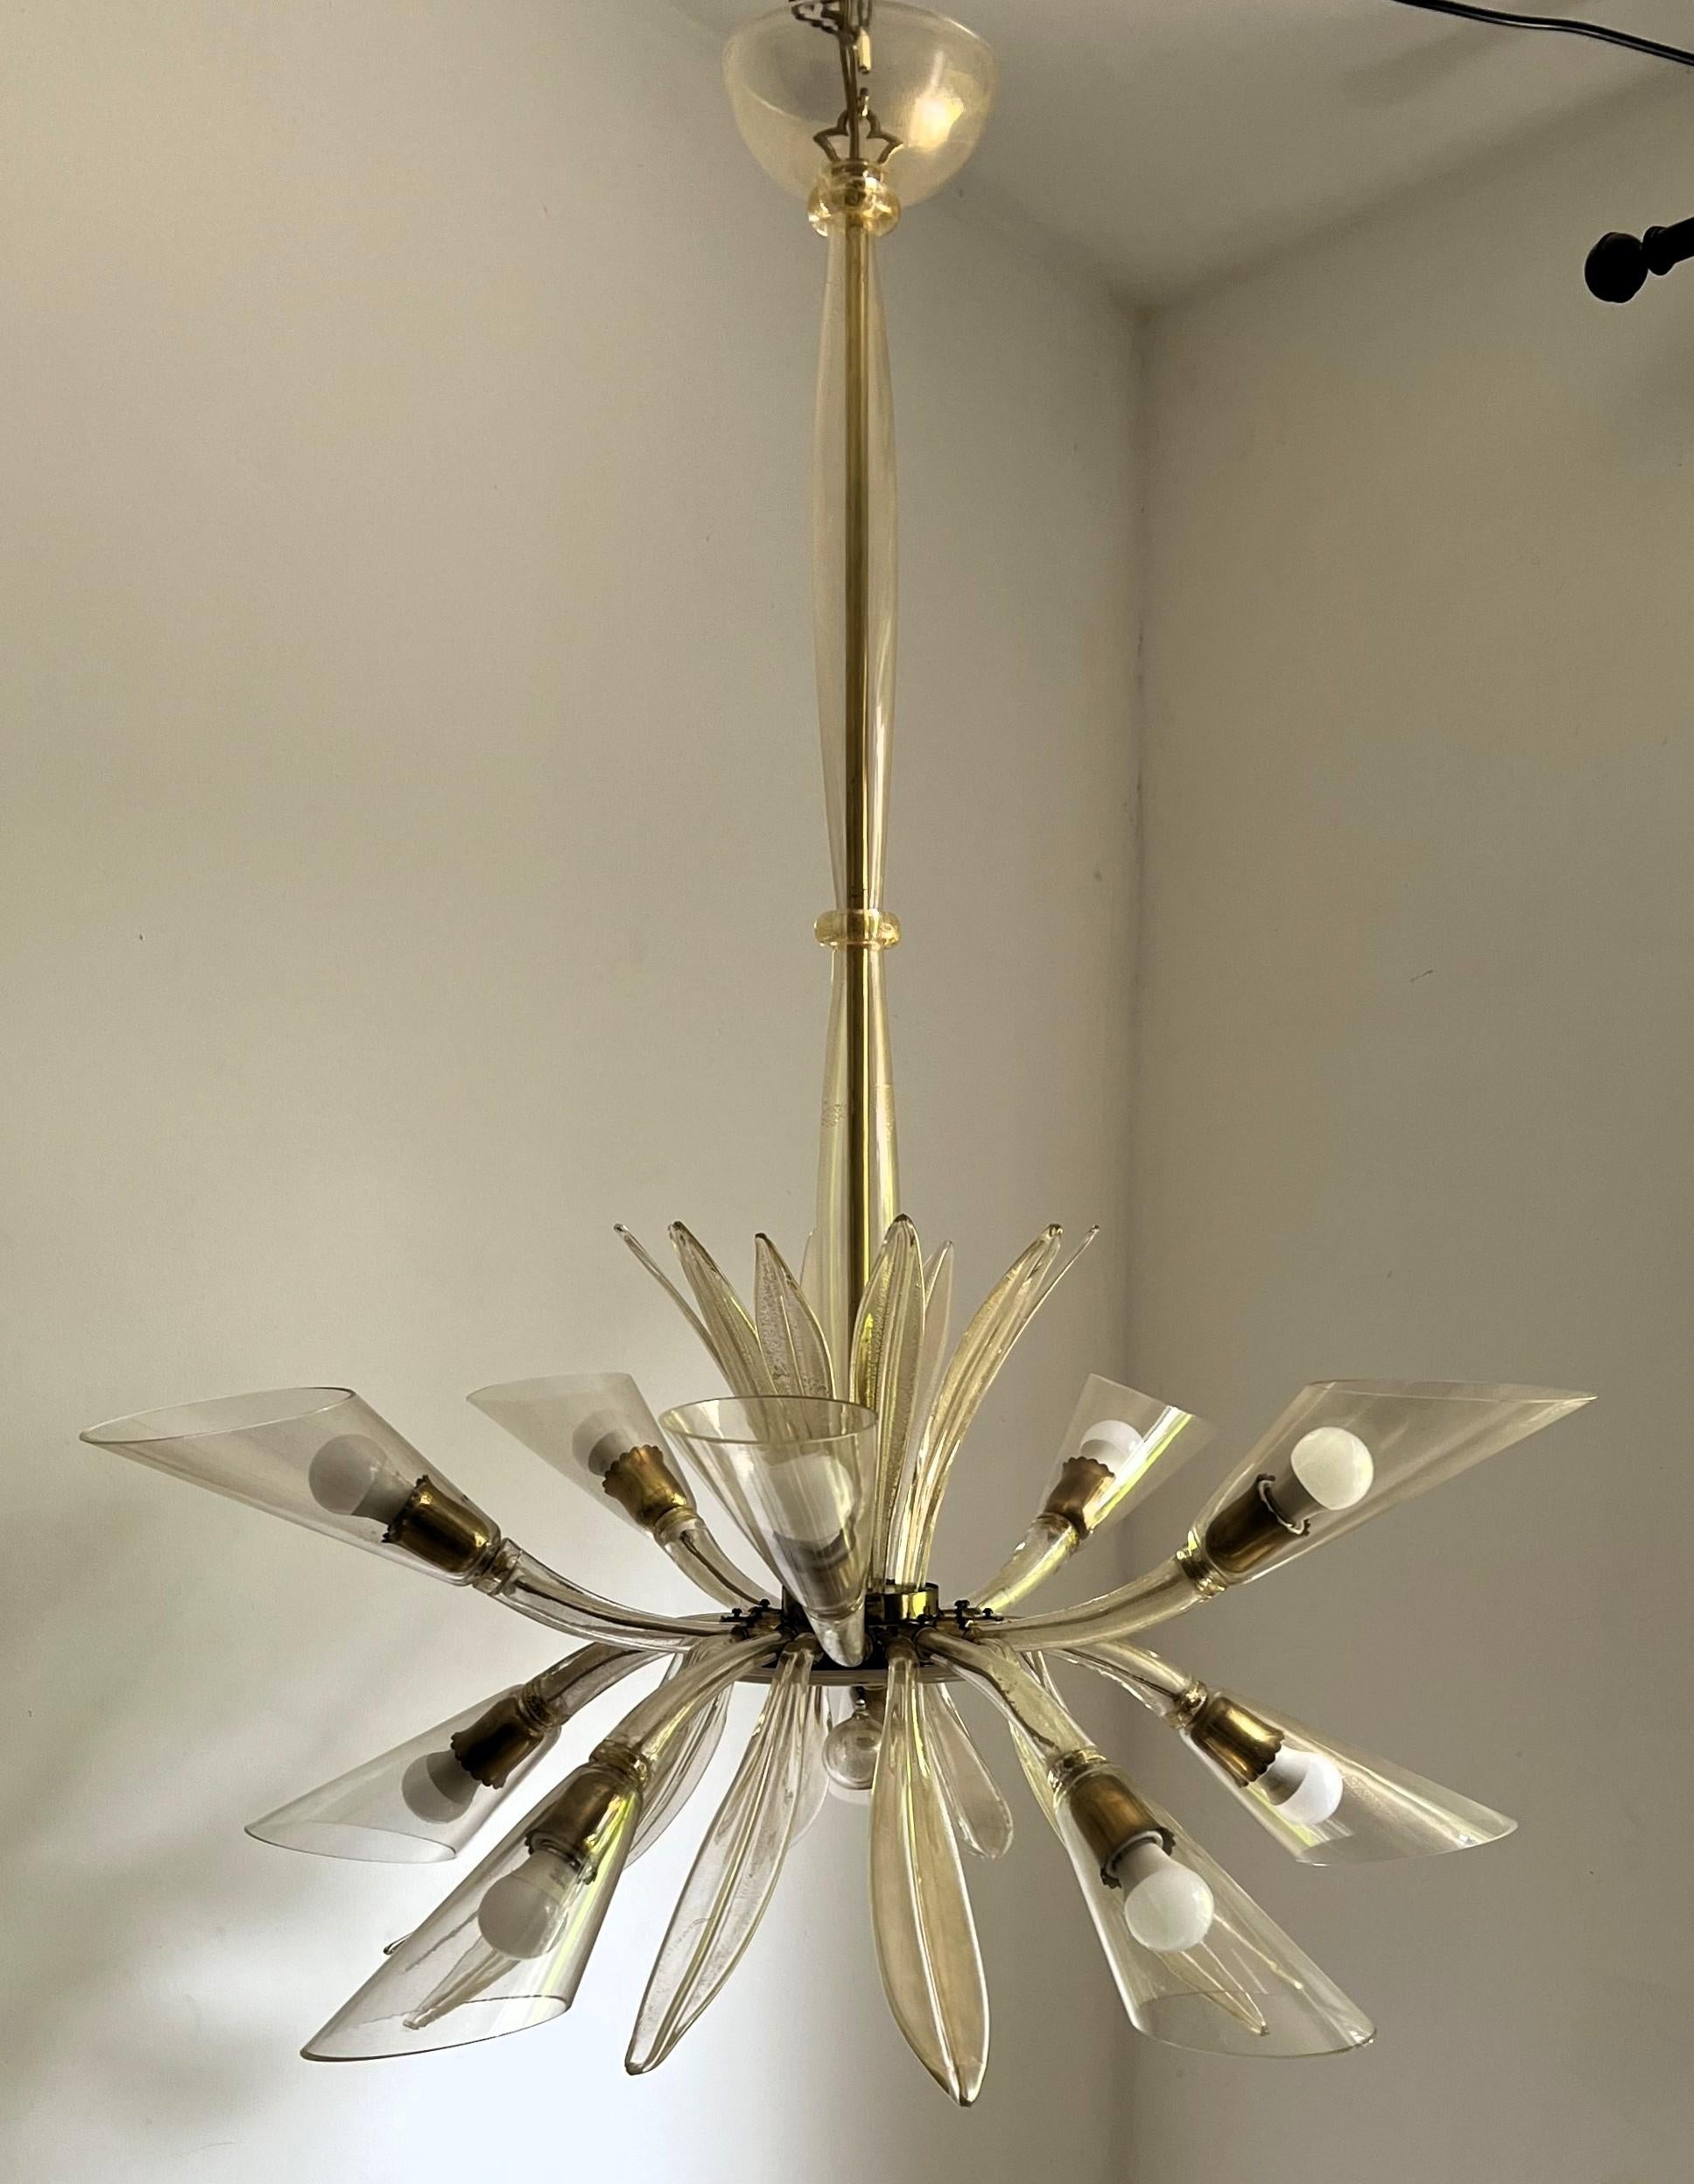 Pair of Art Deco Murano Glass 10 Light Chandeliers attr to Barovier Toso ca 1935 For Sale 2